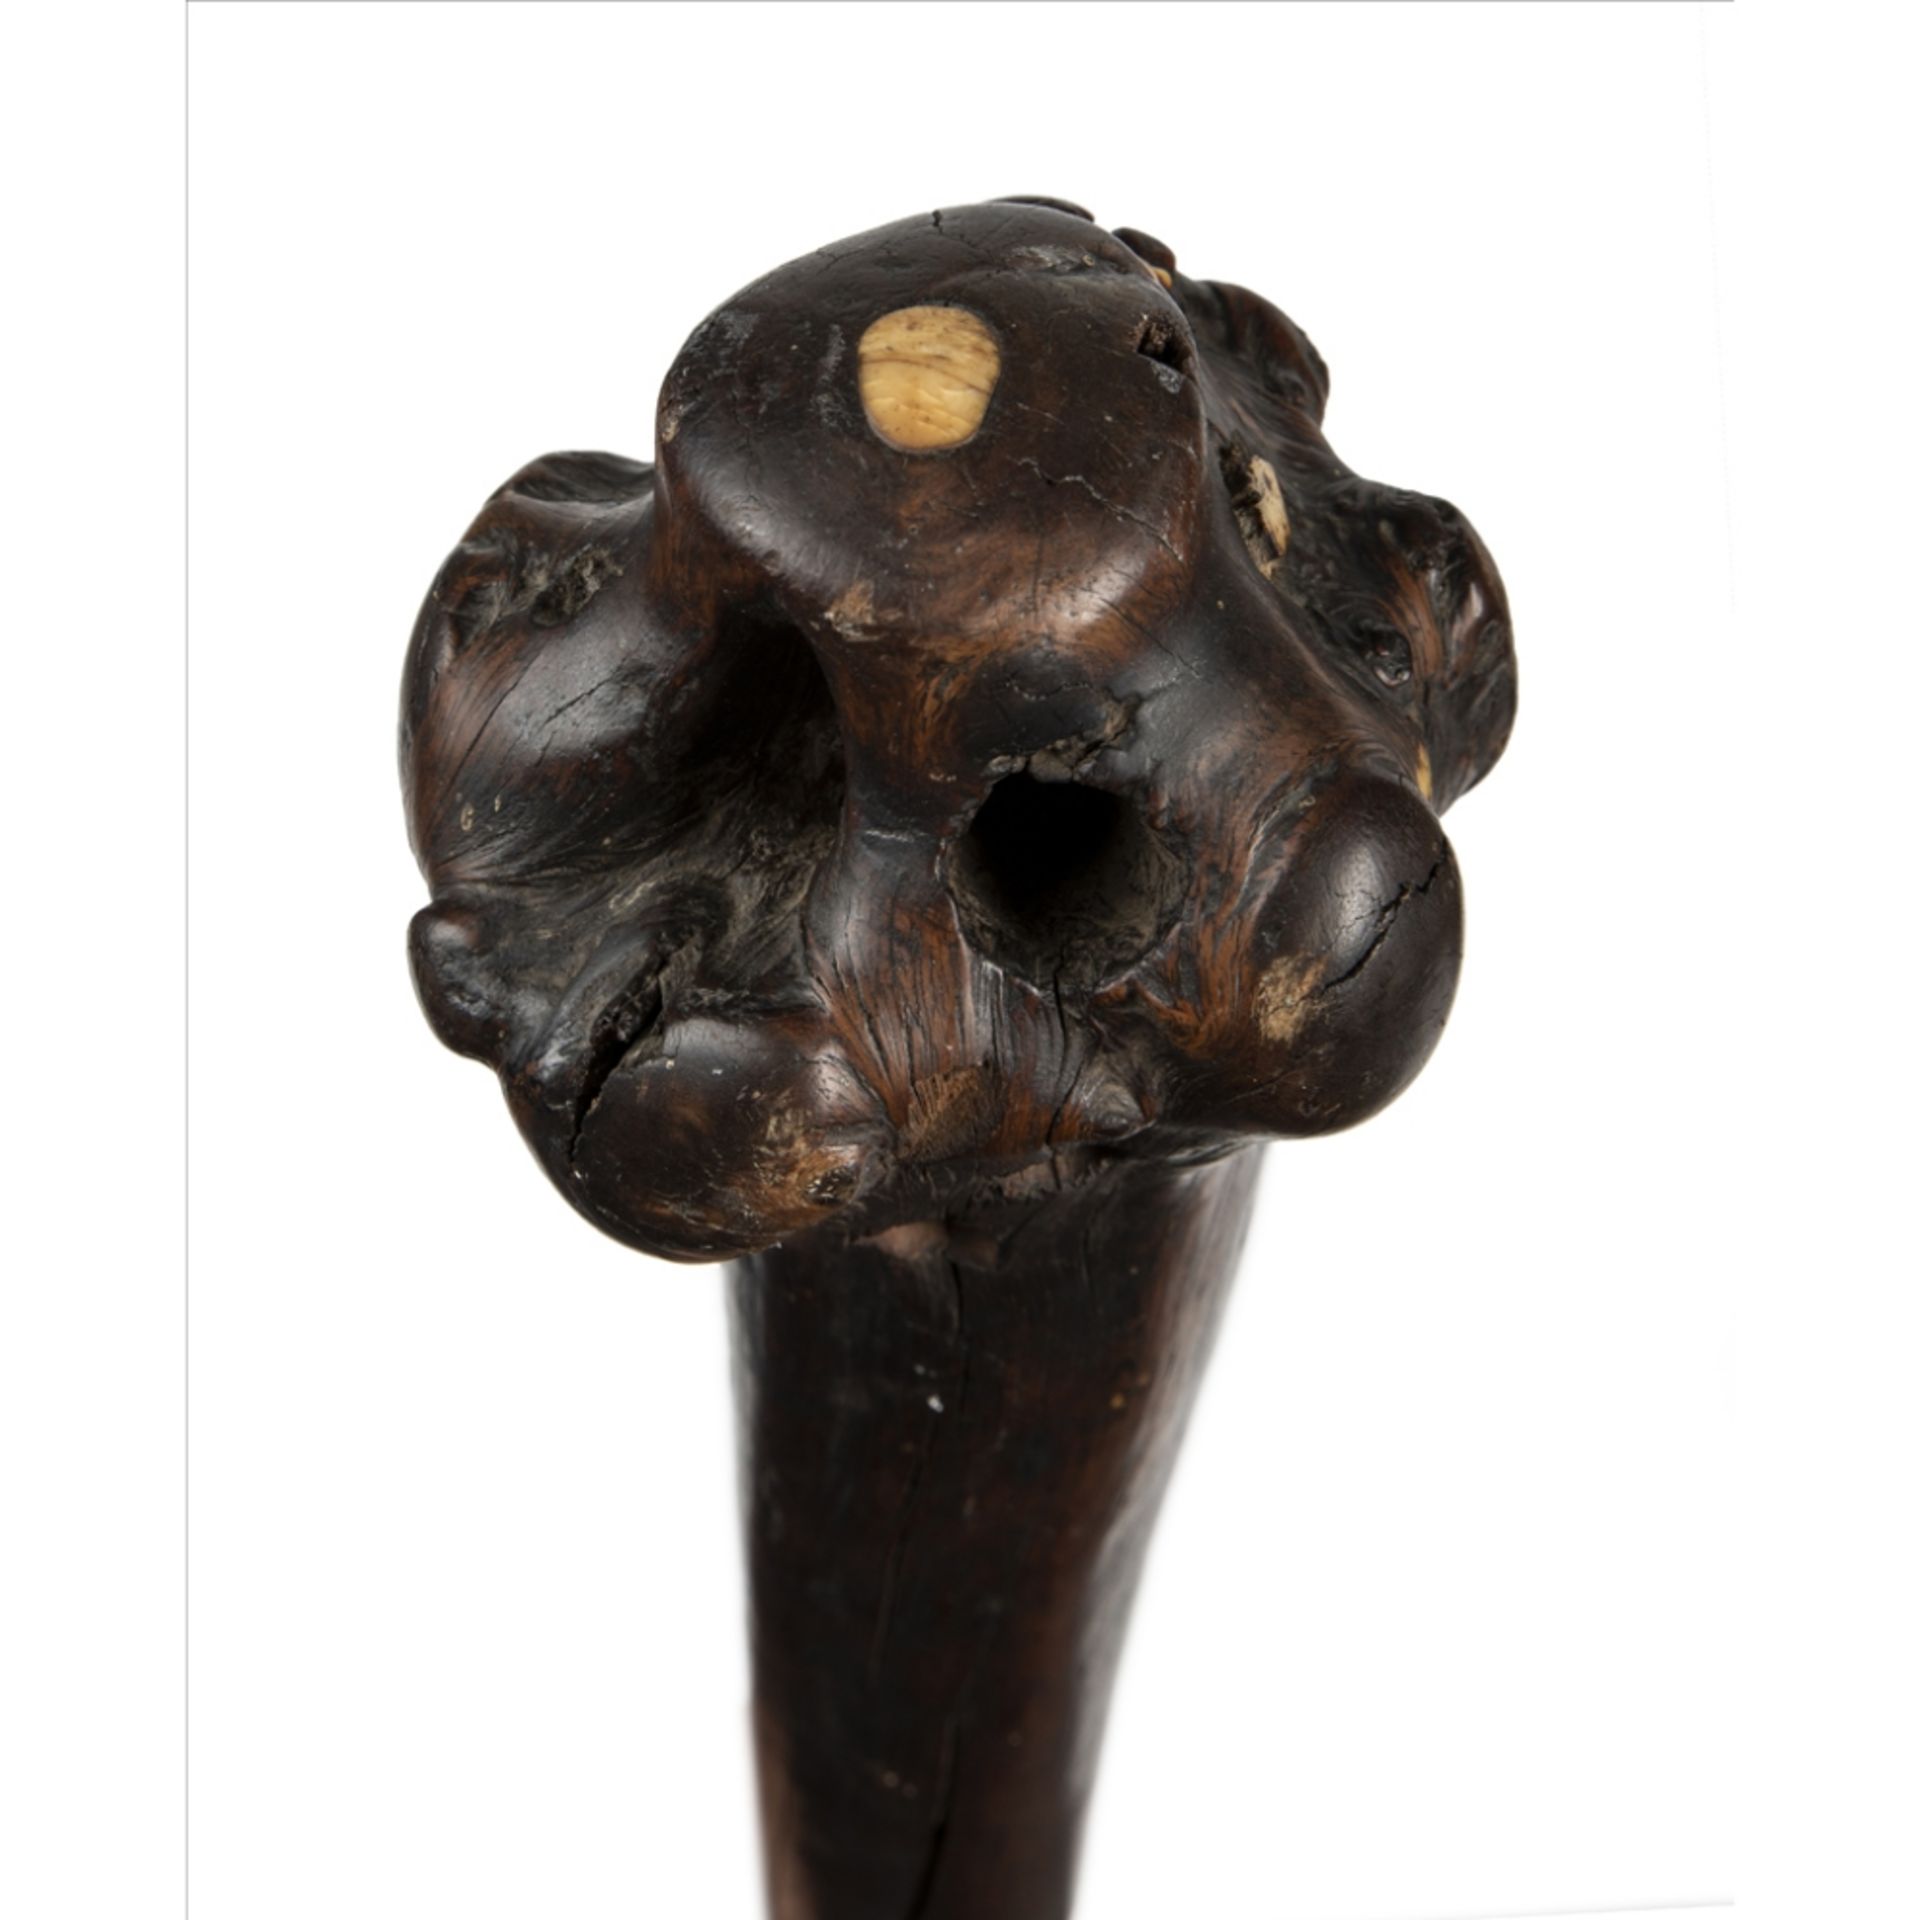 ROOTSTOCK CLUBFIJI, LATE 18TH CENTURY carved wood and marine ivory, the handle with tavatava grip, - Image 2 of 4